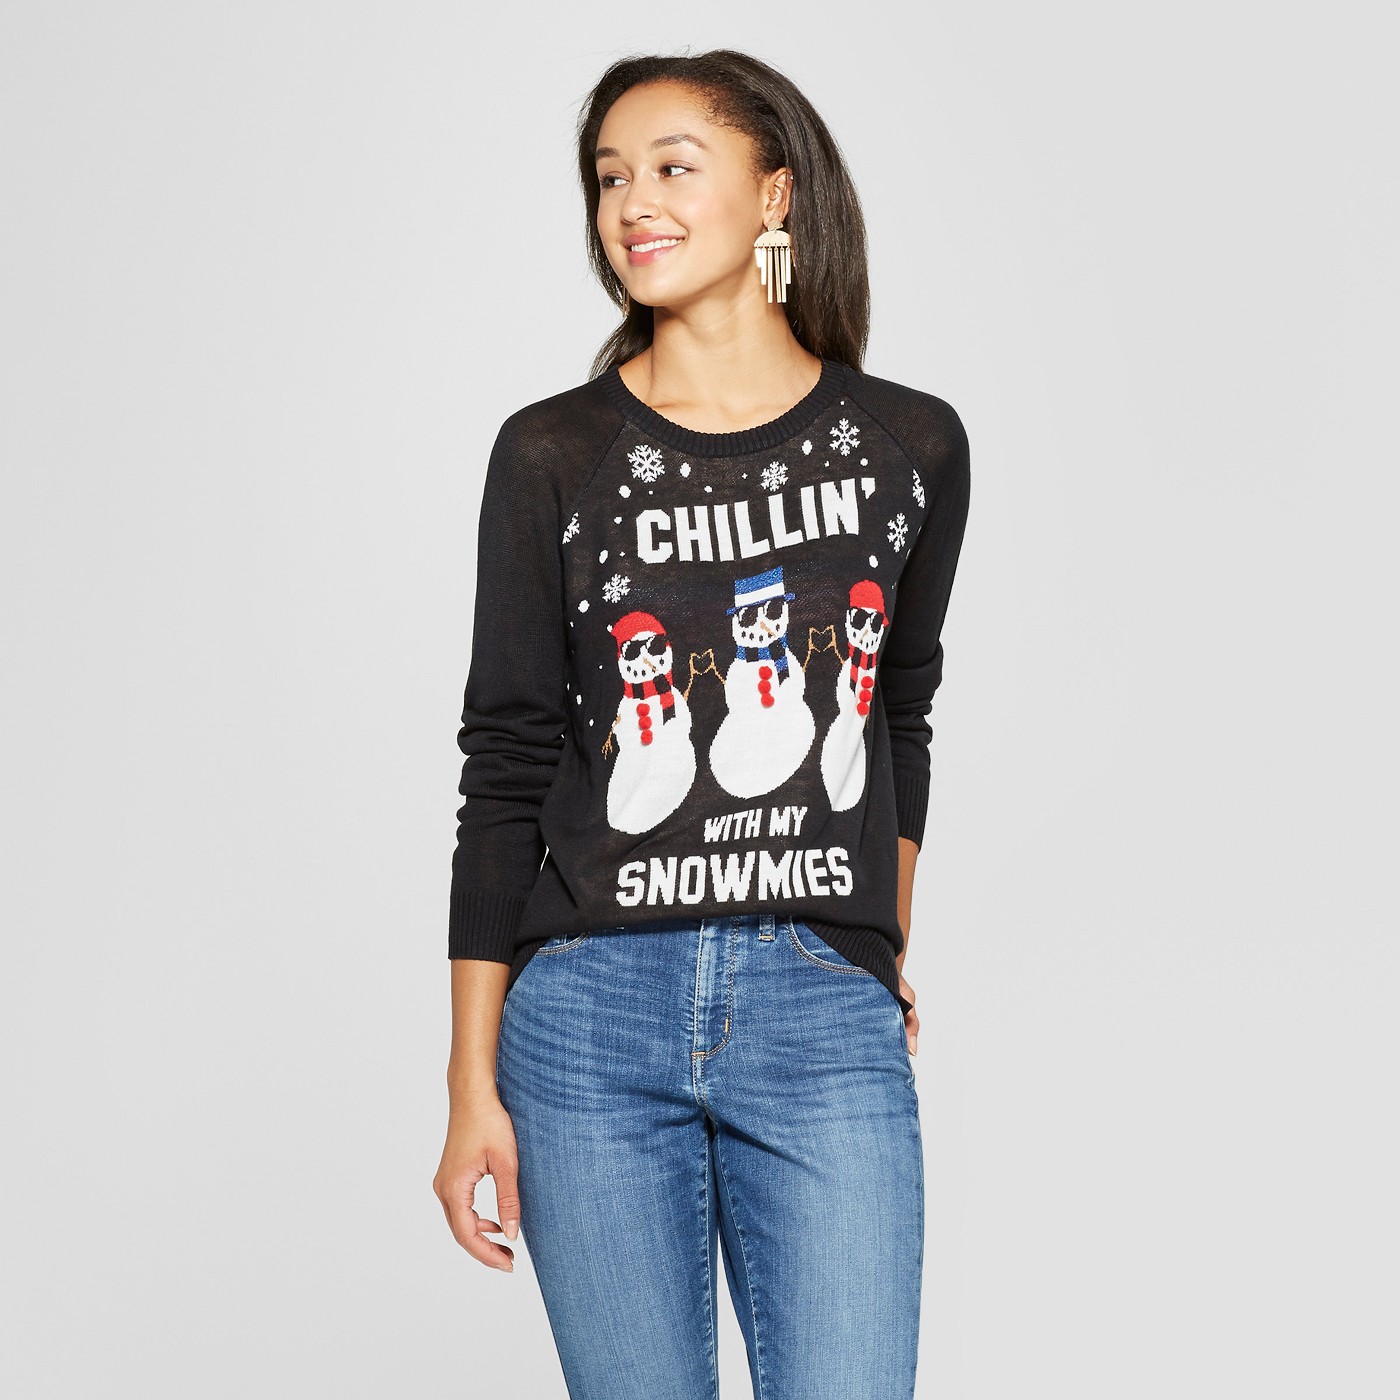 Women's Chillin with my Snowmies Ugly Sweater - Well Worn (Juniors') Black - image 1 of 2